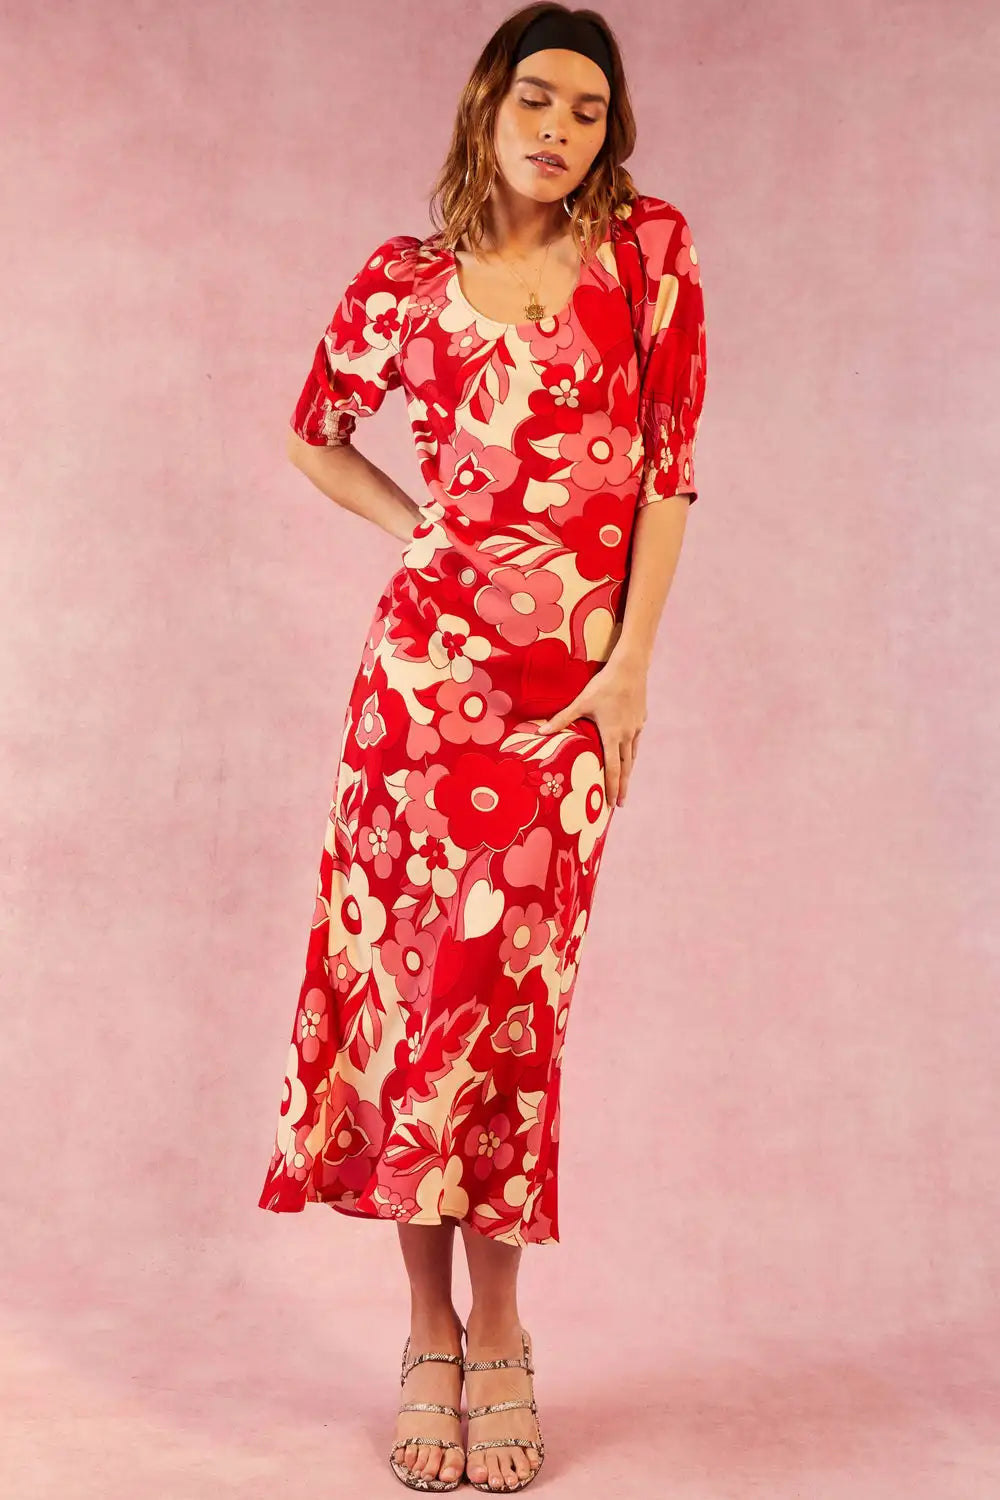 The Oleander Midi Dress is the perfect combination of style and comfort. With a loose and floaty fit, concealed elastic cuffs, and a scoop neck, it's designed to flatter all body types. Plus, the Sweetheart Floral Pink print adds a touch of femininity. Perfect for any occasion, this dress is sure to become a staple in your wardrobe.